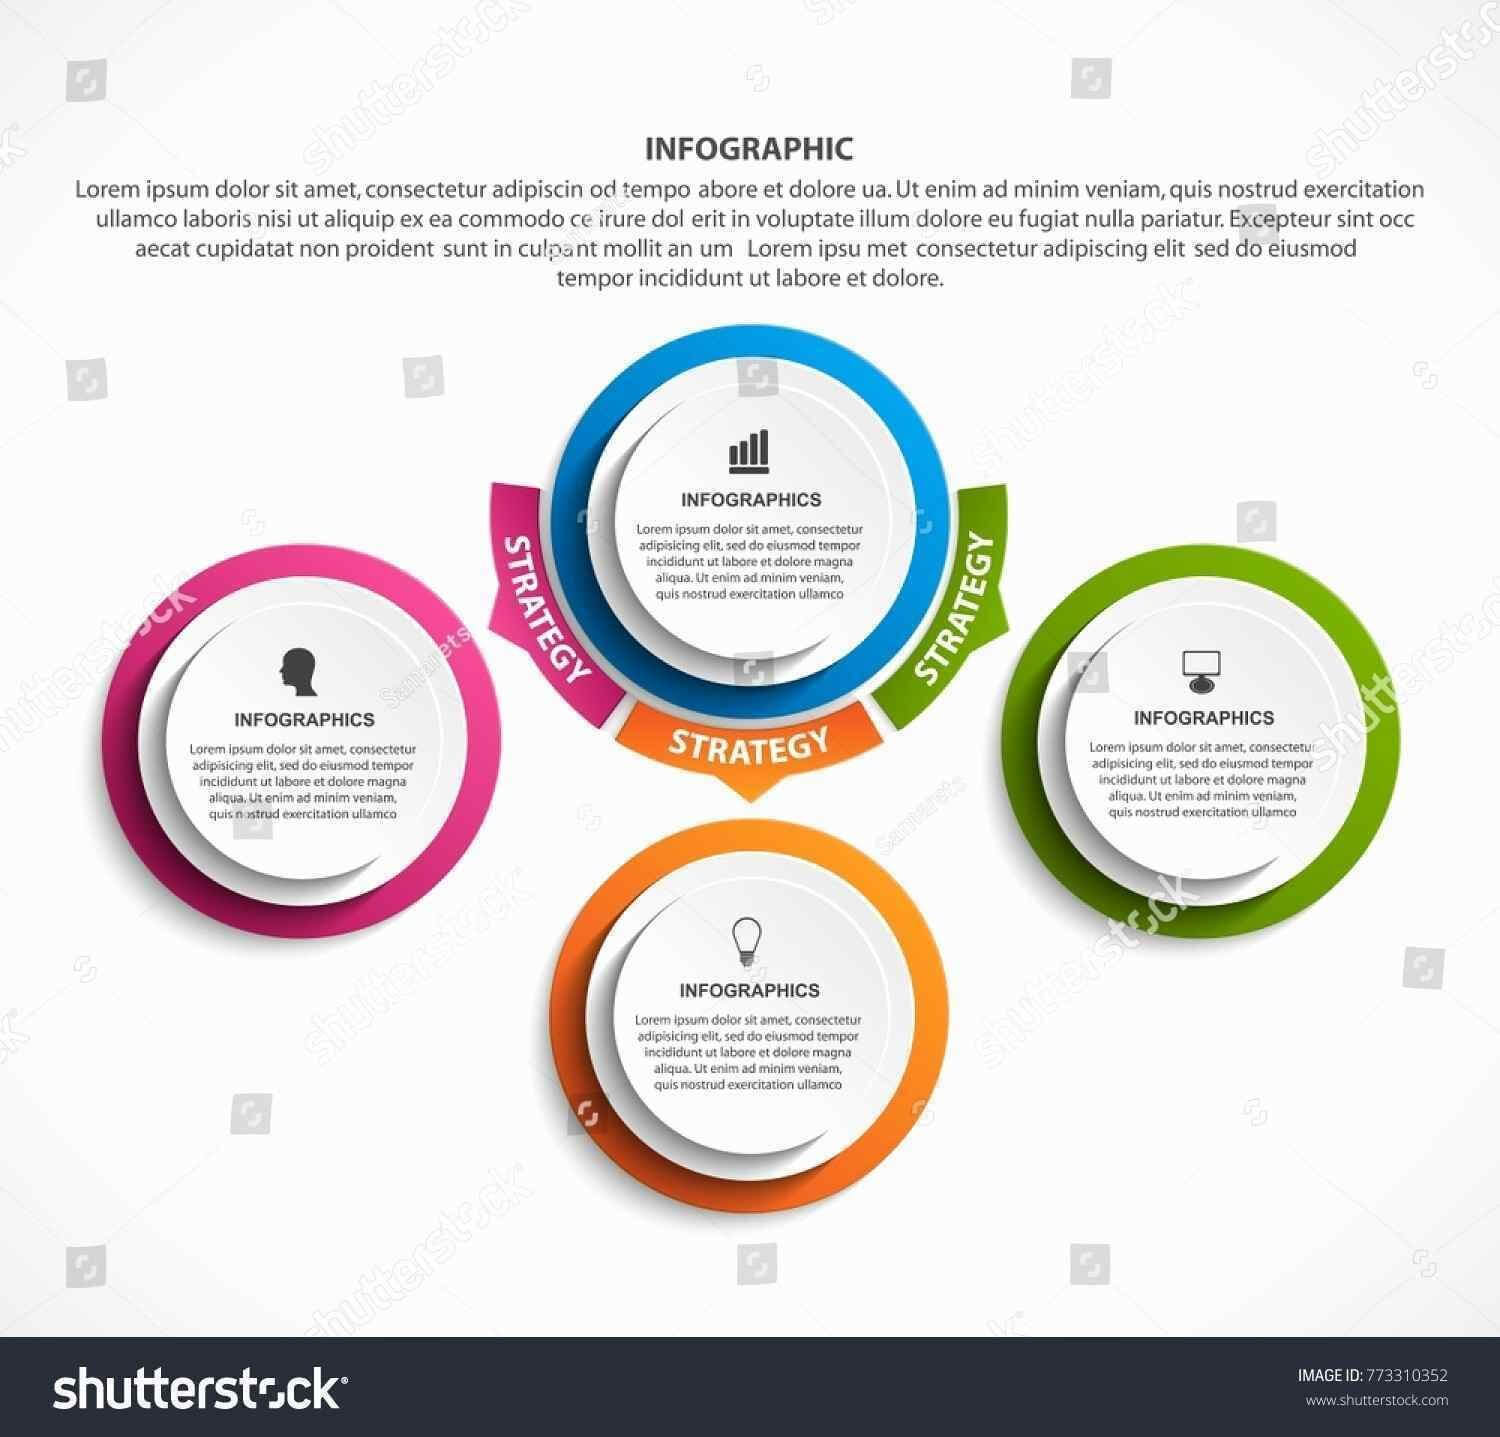 Change Infographic – Âˆš ¢Ë†å¡ Change Template Powerpoint Inside How To Change Template In Powerpoint